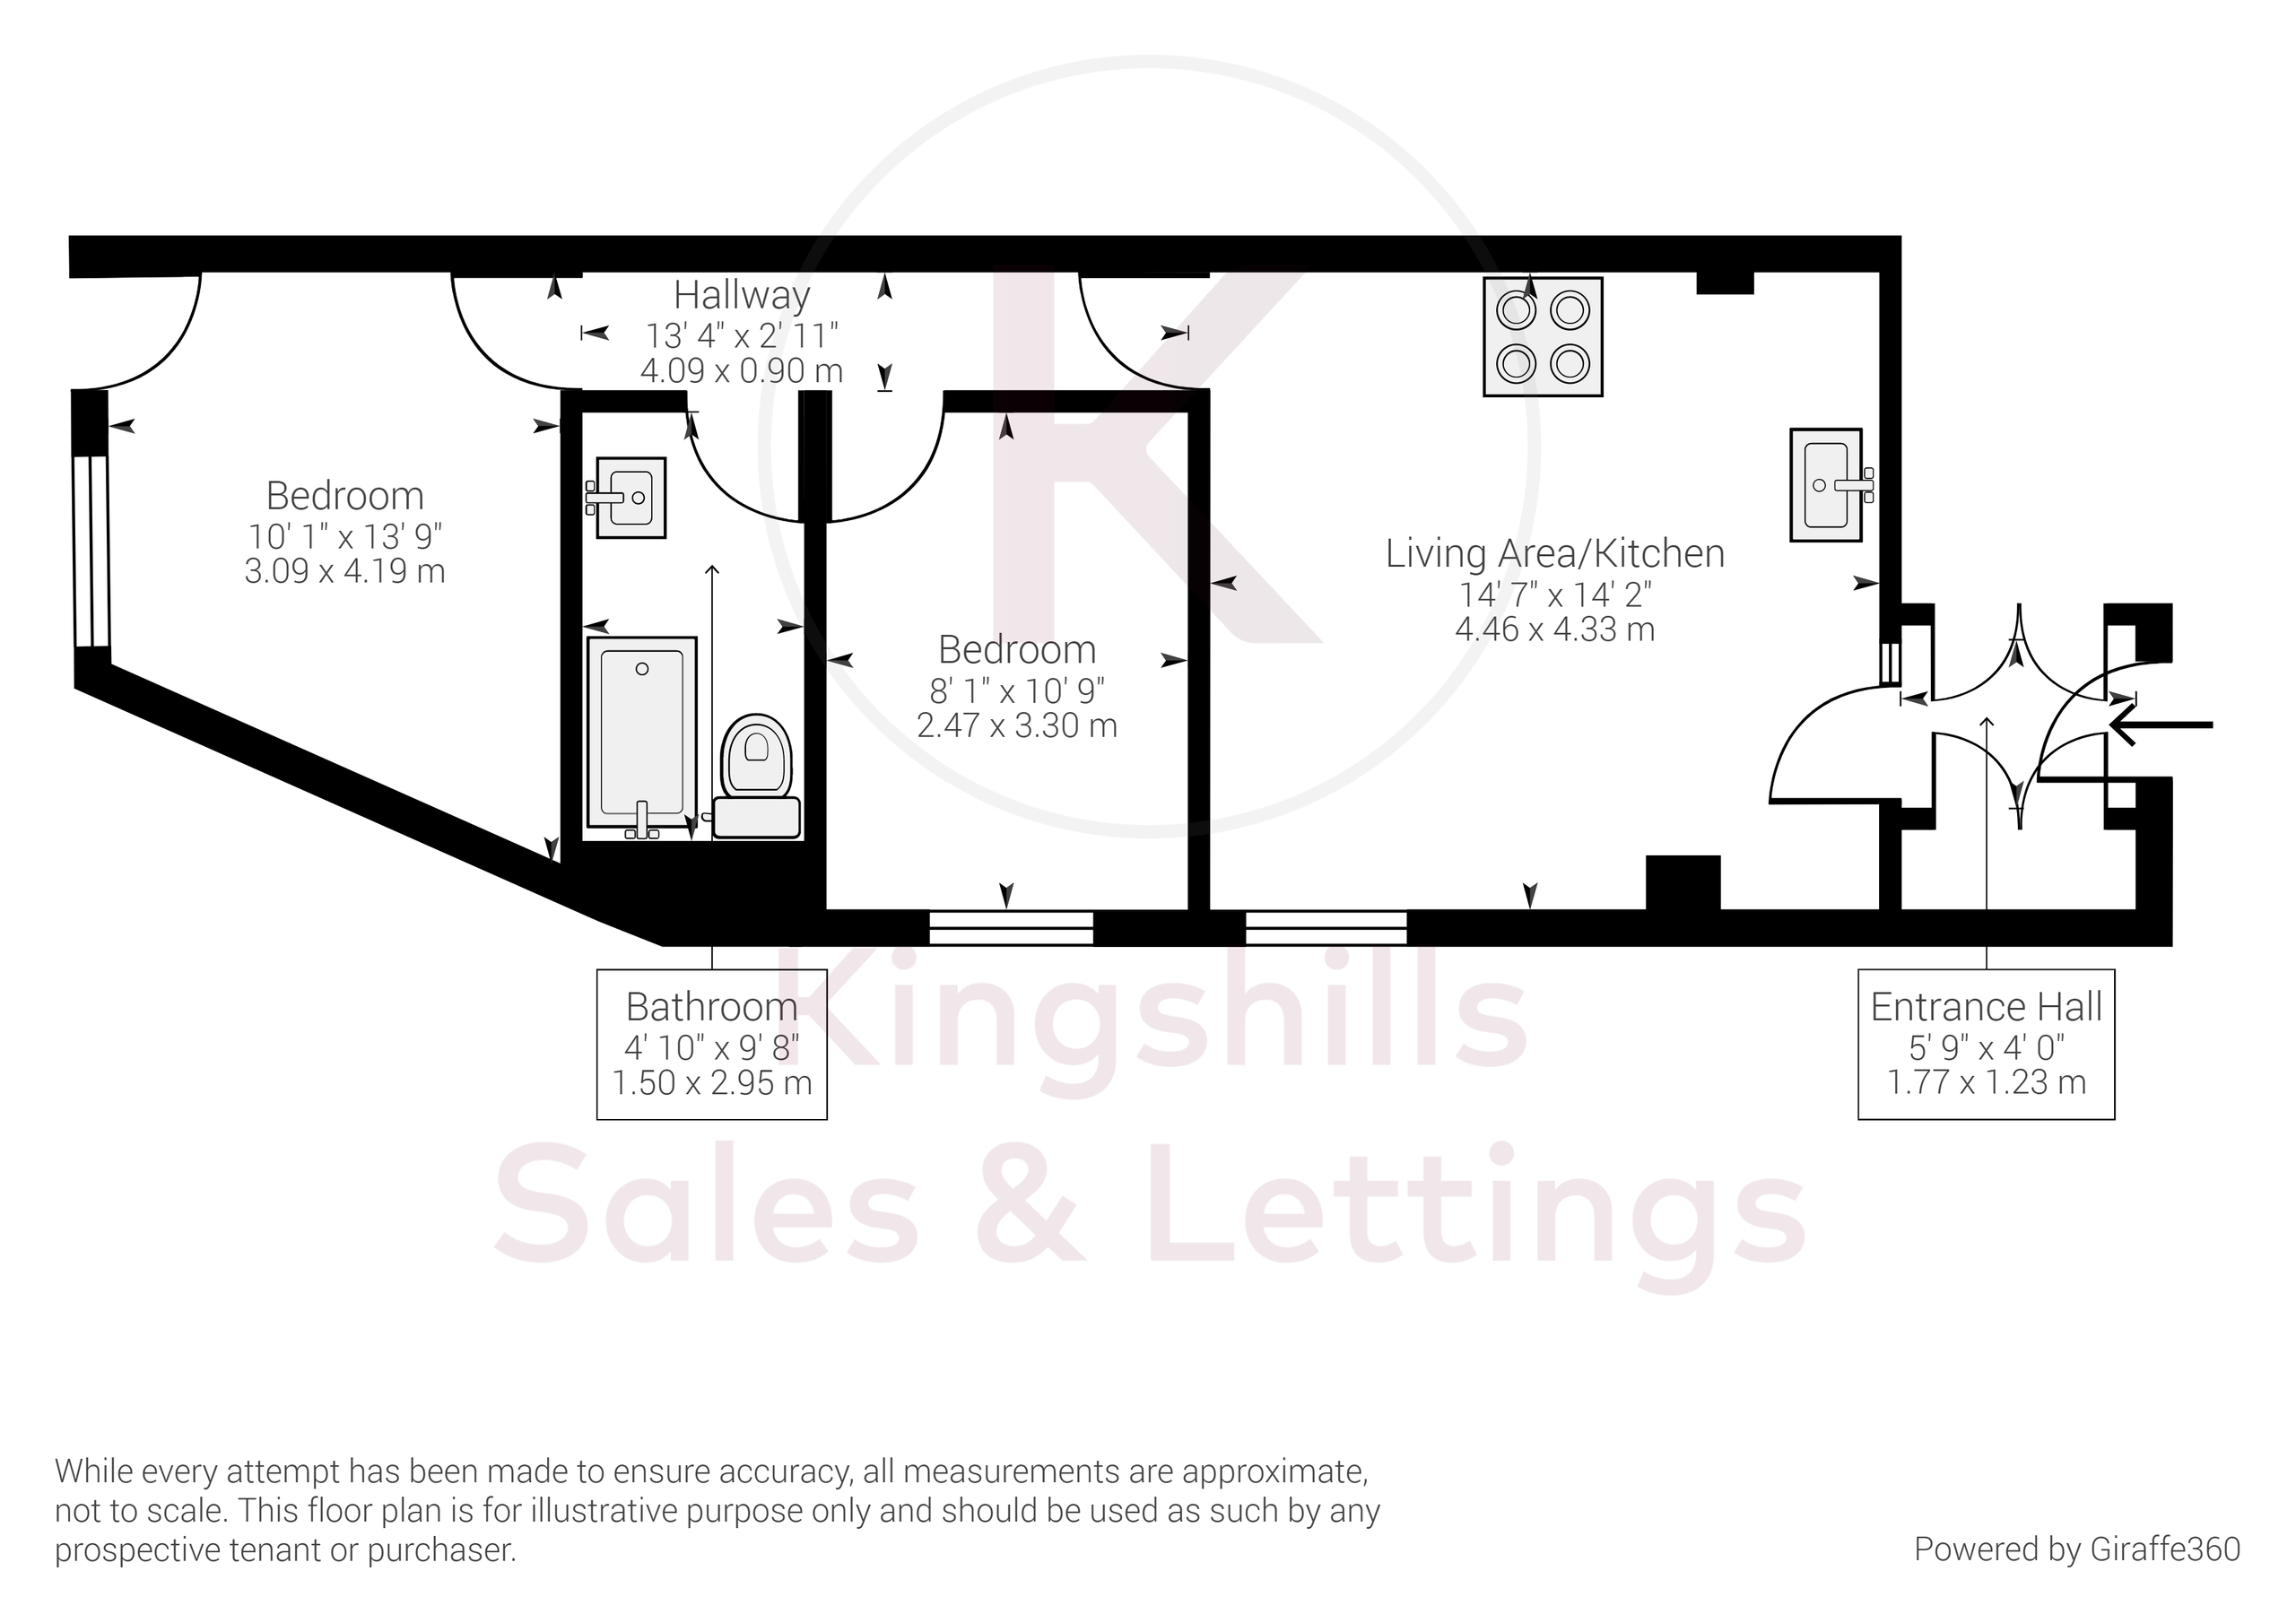 2 bed apartment to rent in High Street, High Wycombe - Property floorplan